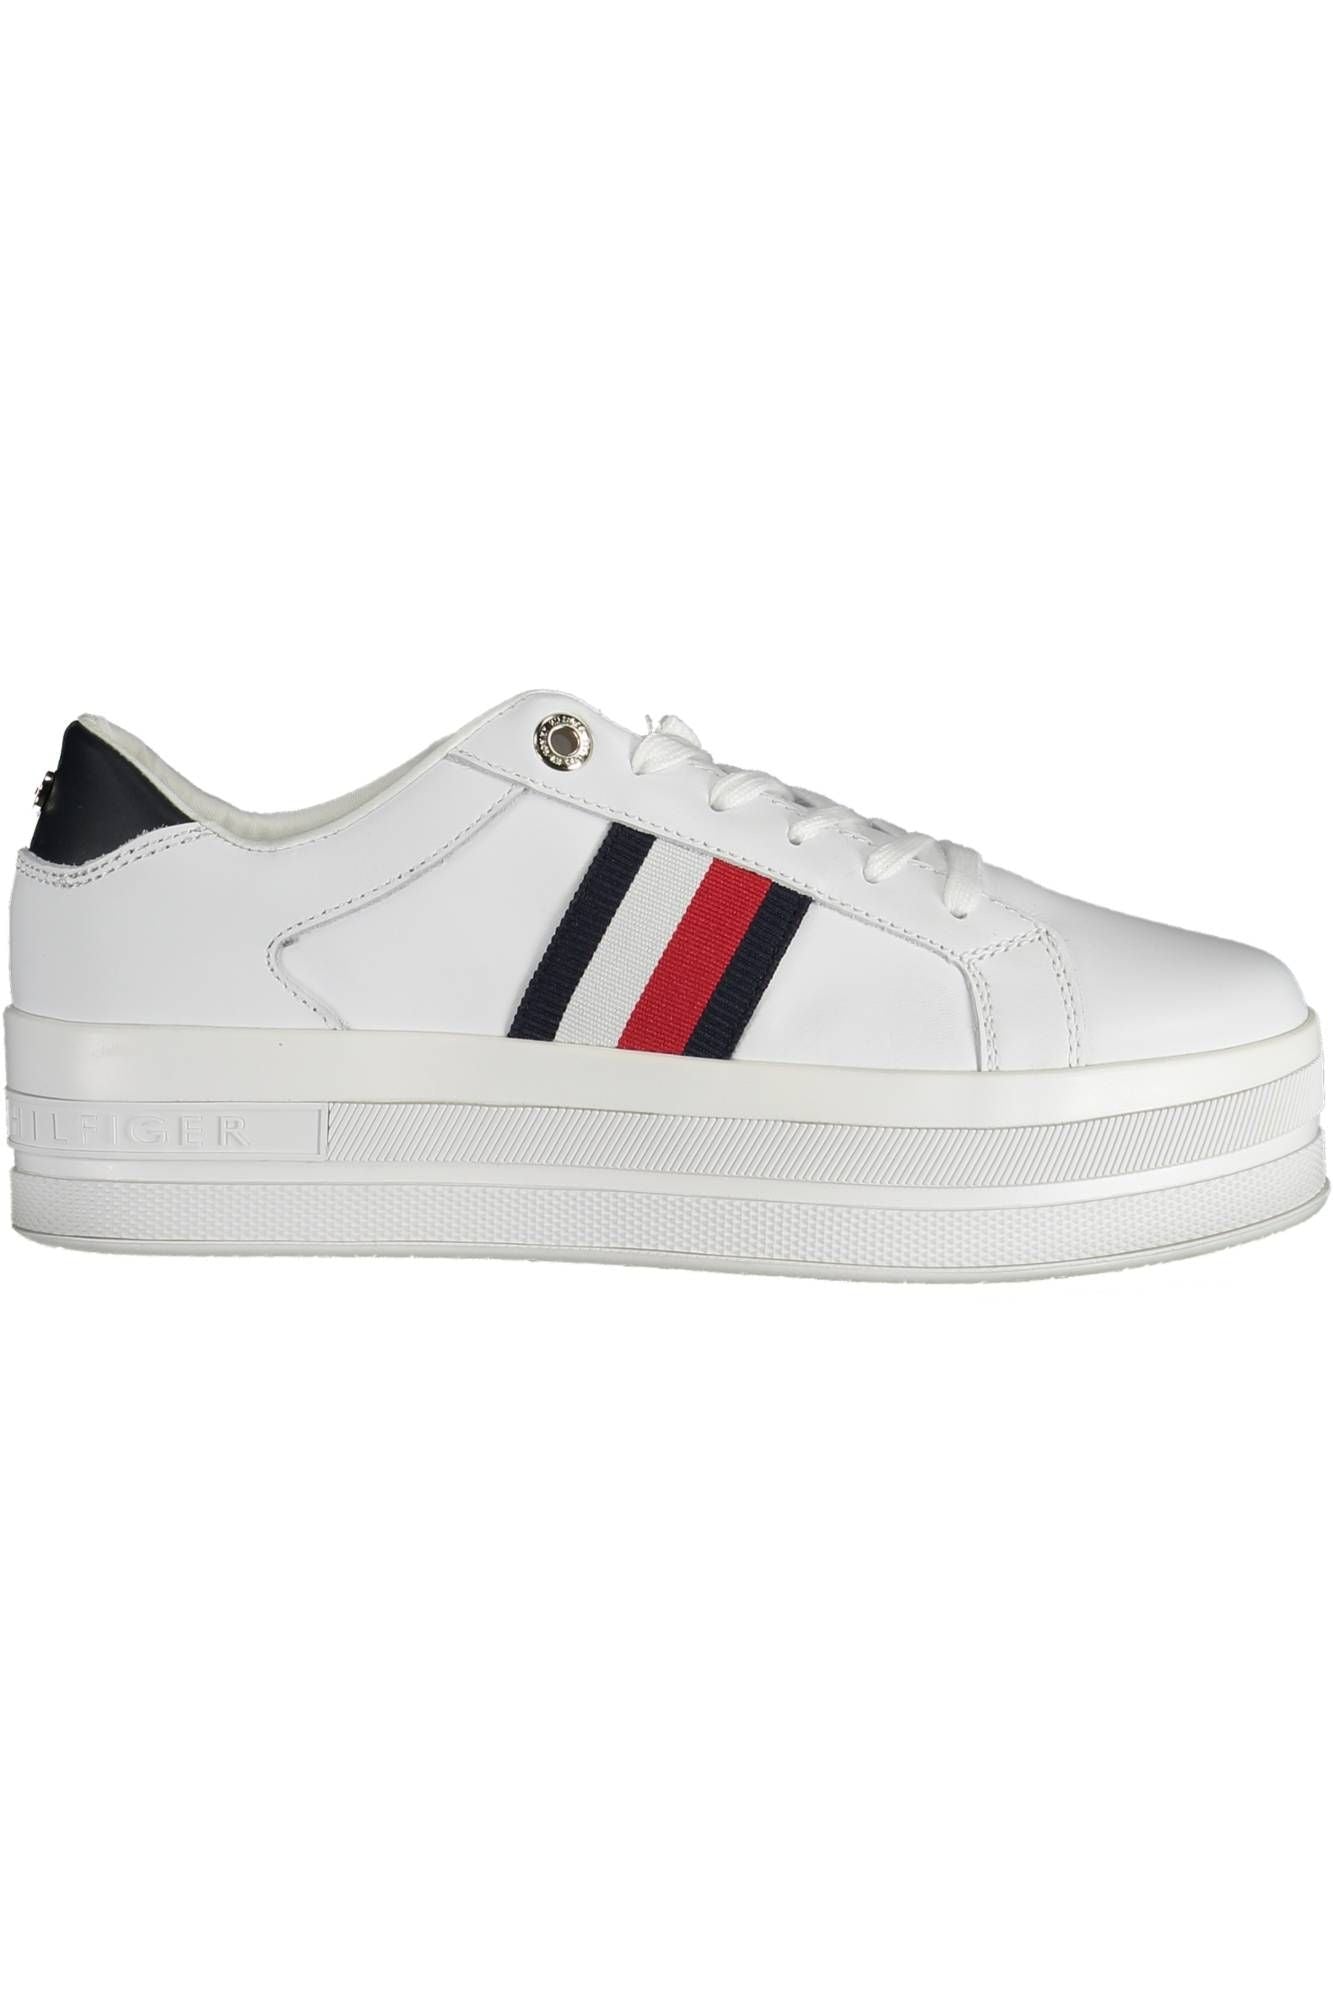 Tommy Hilfiger Sleek White Sneakers with Eco-Conscious Appeal